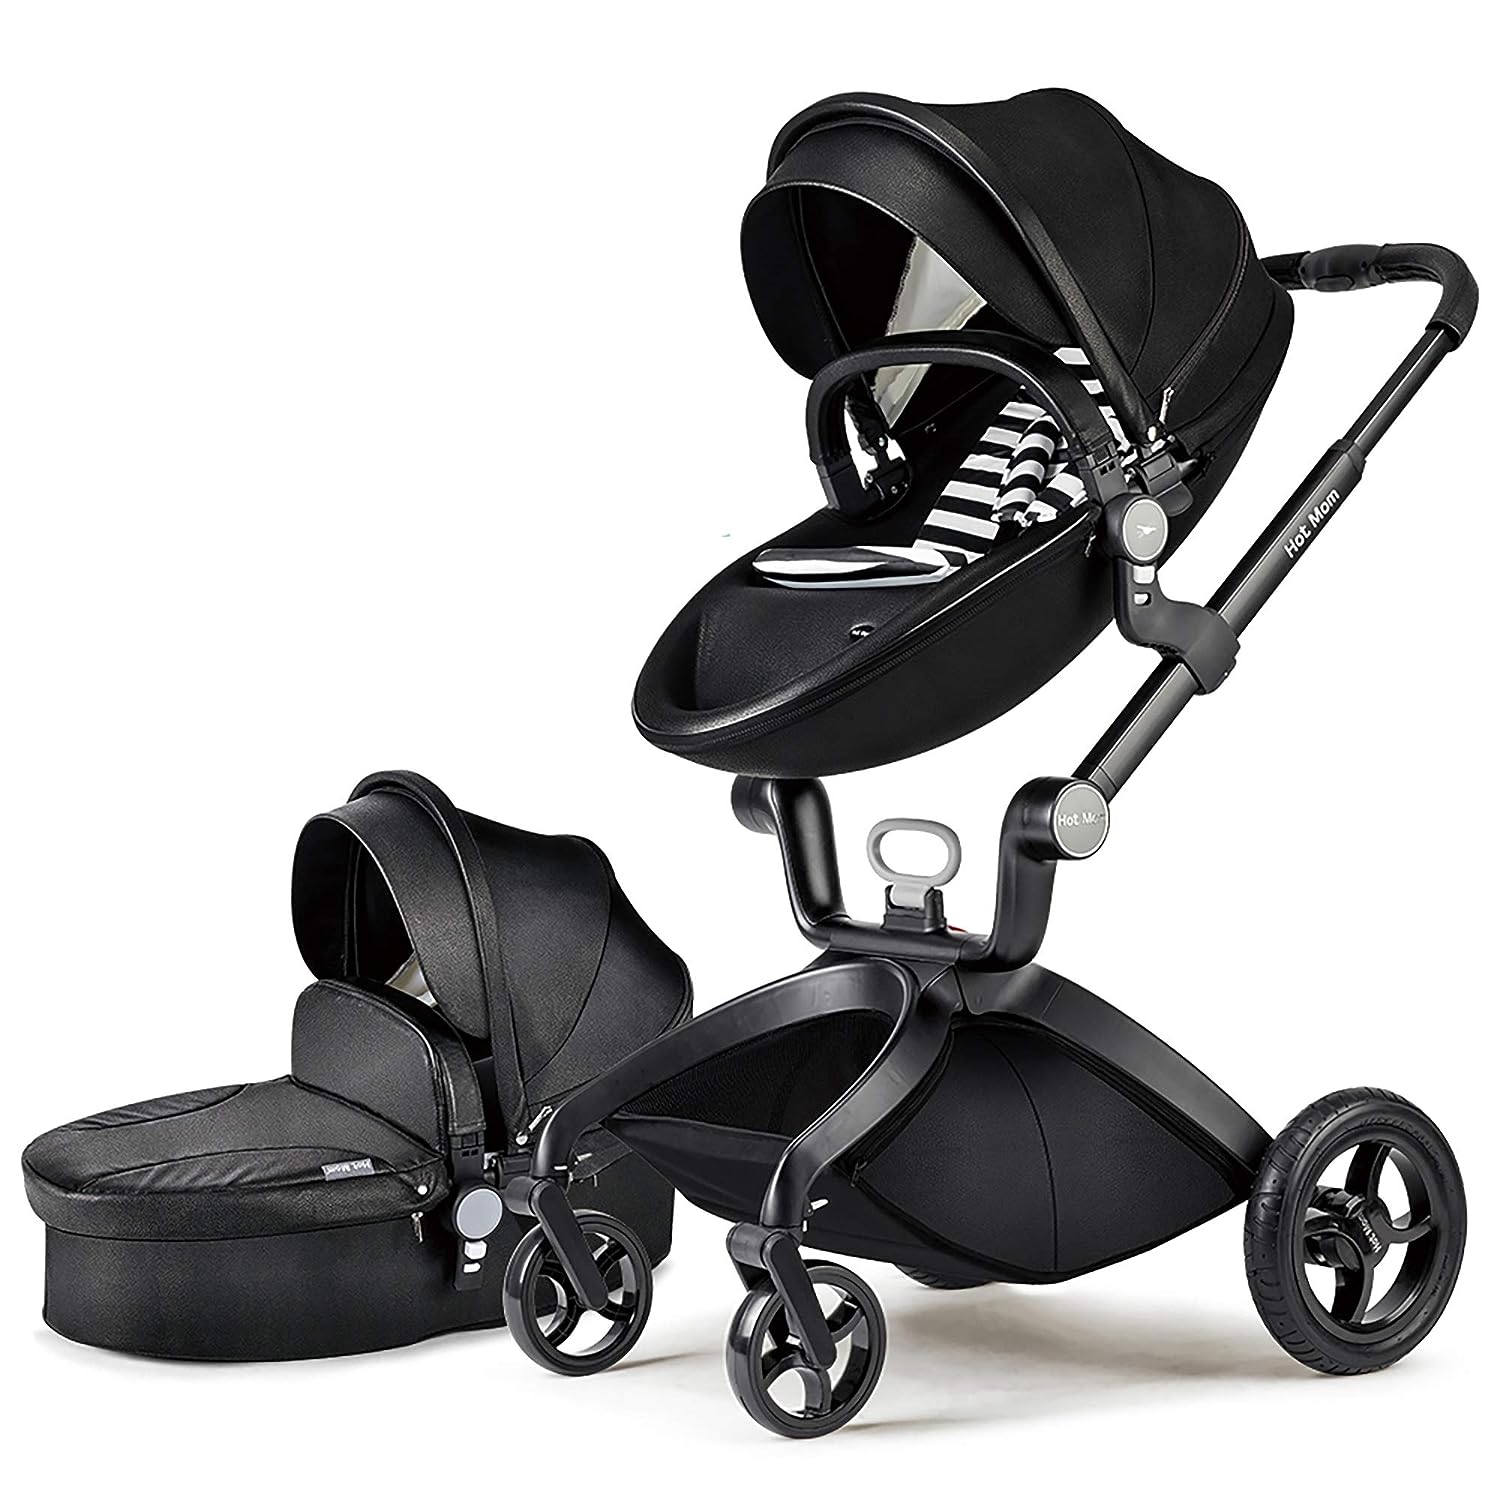 Baby Stroller: Height-Adjustable Seat and Reclining Baby Carriage with Four-Wheel Shock Absorption, Bidirectional, Elevated View, Stylish Stroller